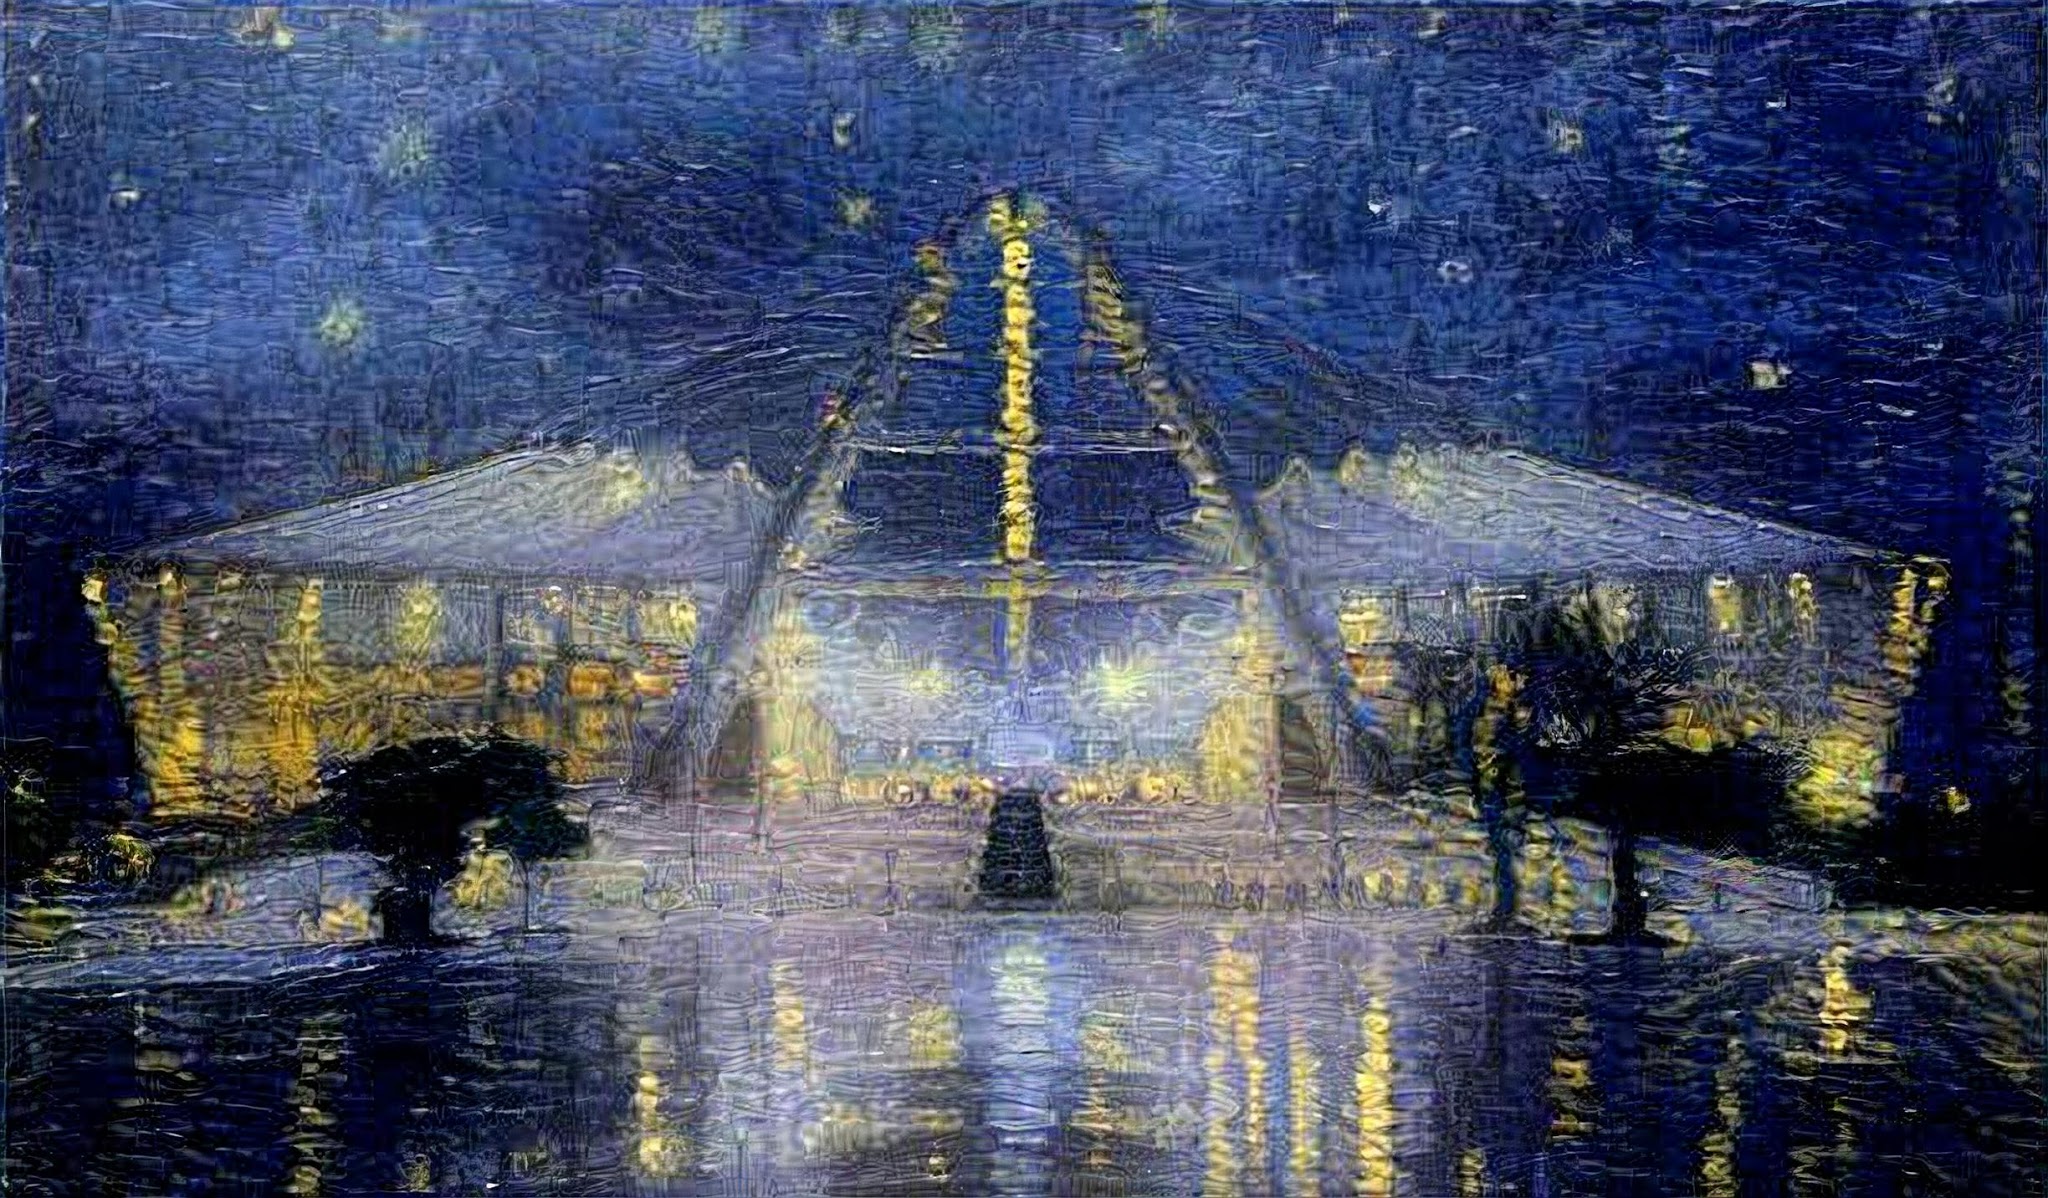 Style-transfer of Starry Night by Van Gogh and Moses Mabhida Stadium, plus super-resolution to 4x with magic enhanced